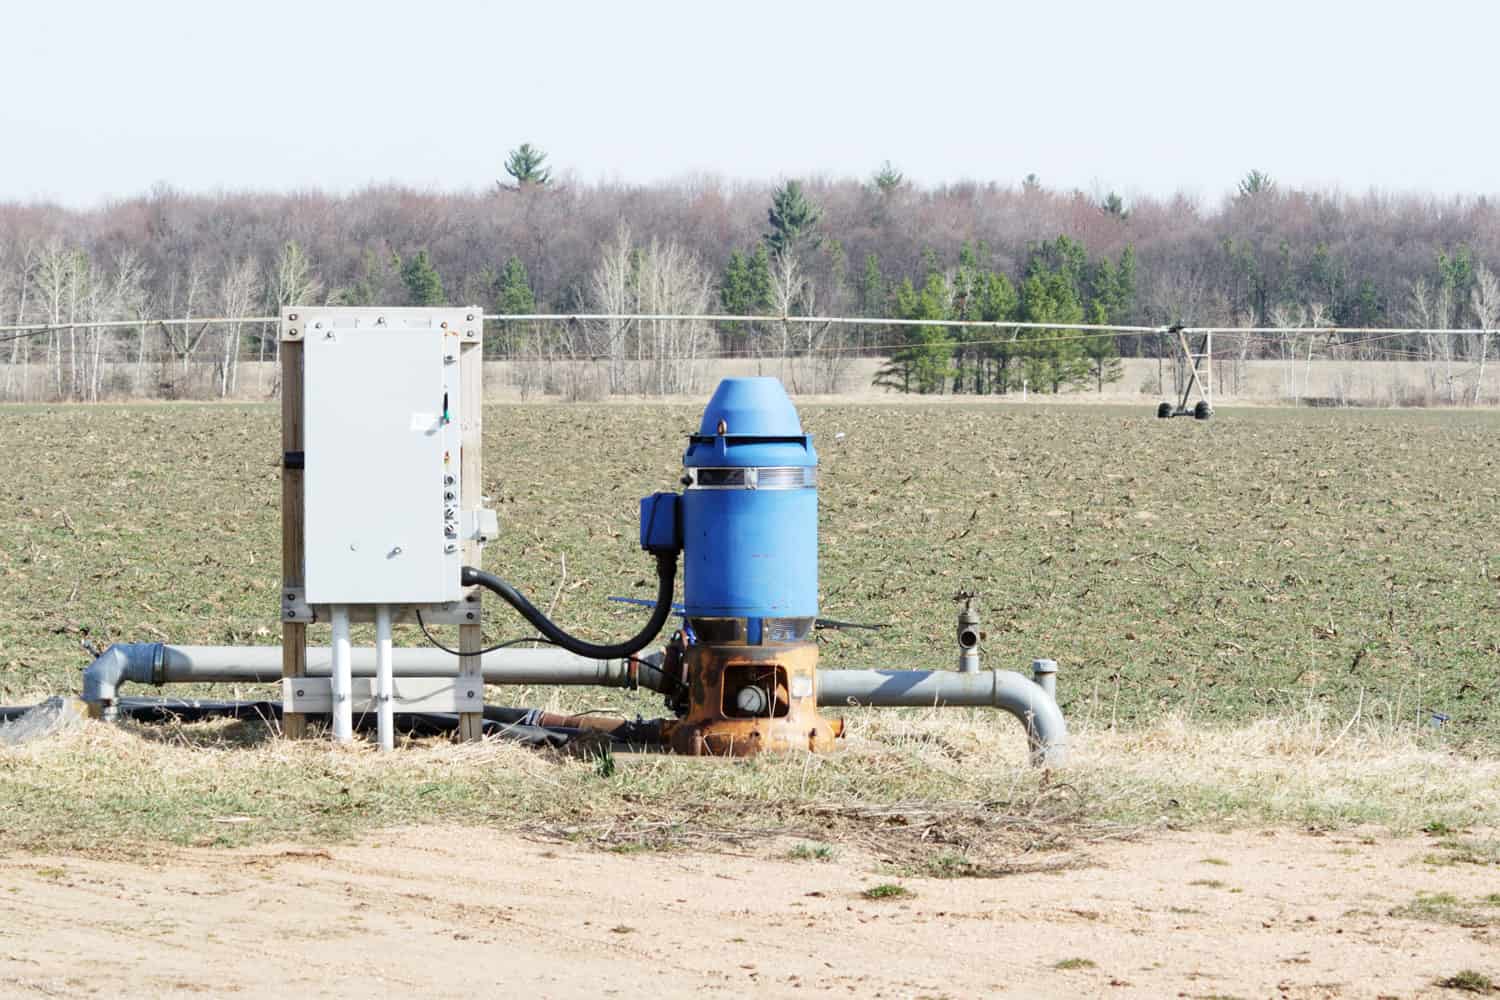 A blue colored irrigation well pump in the field